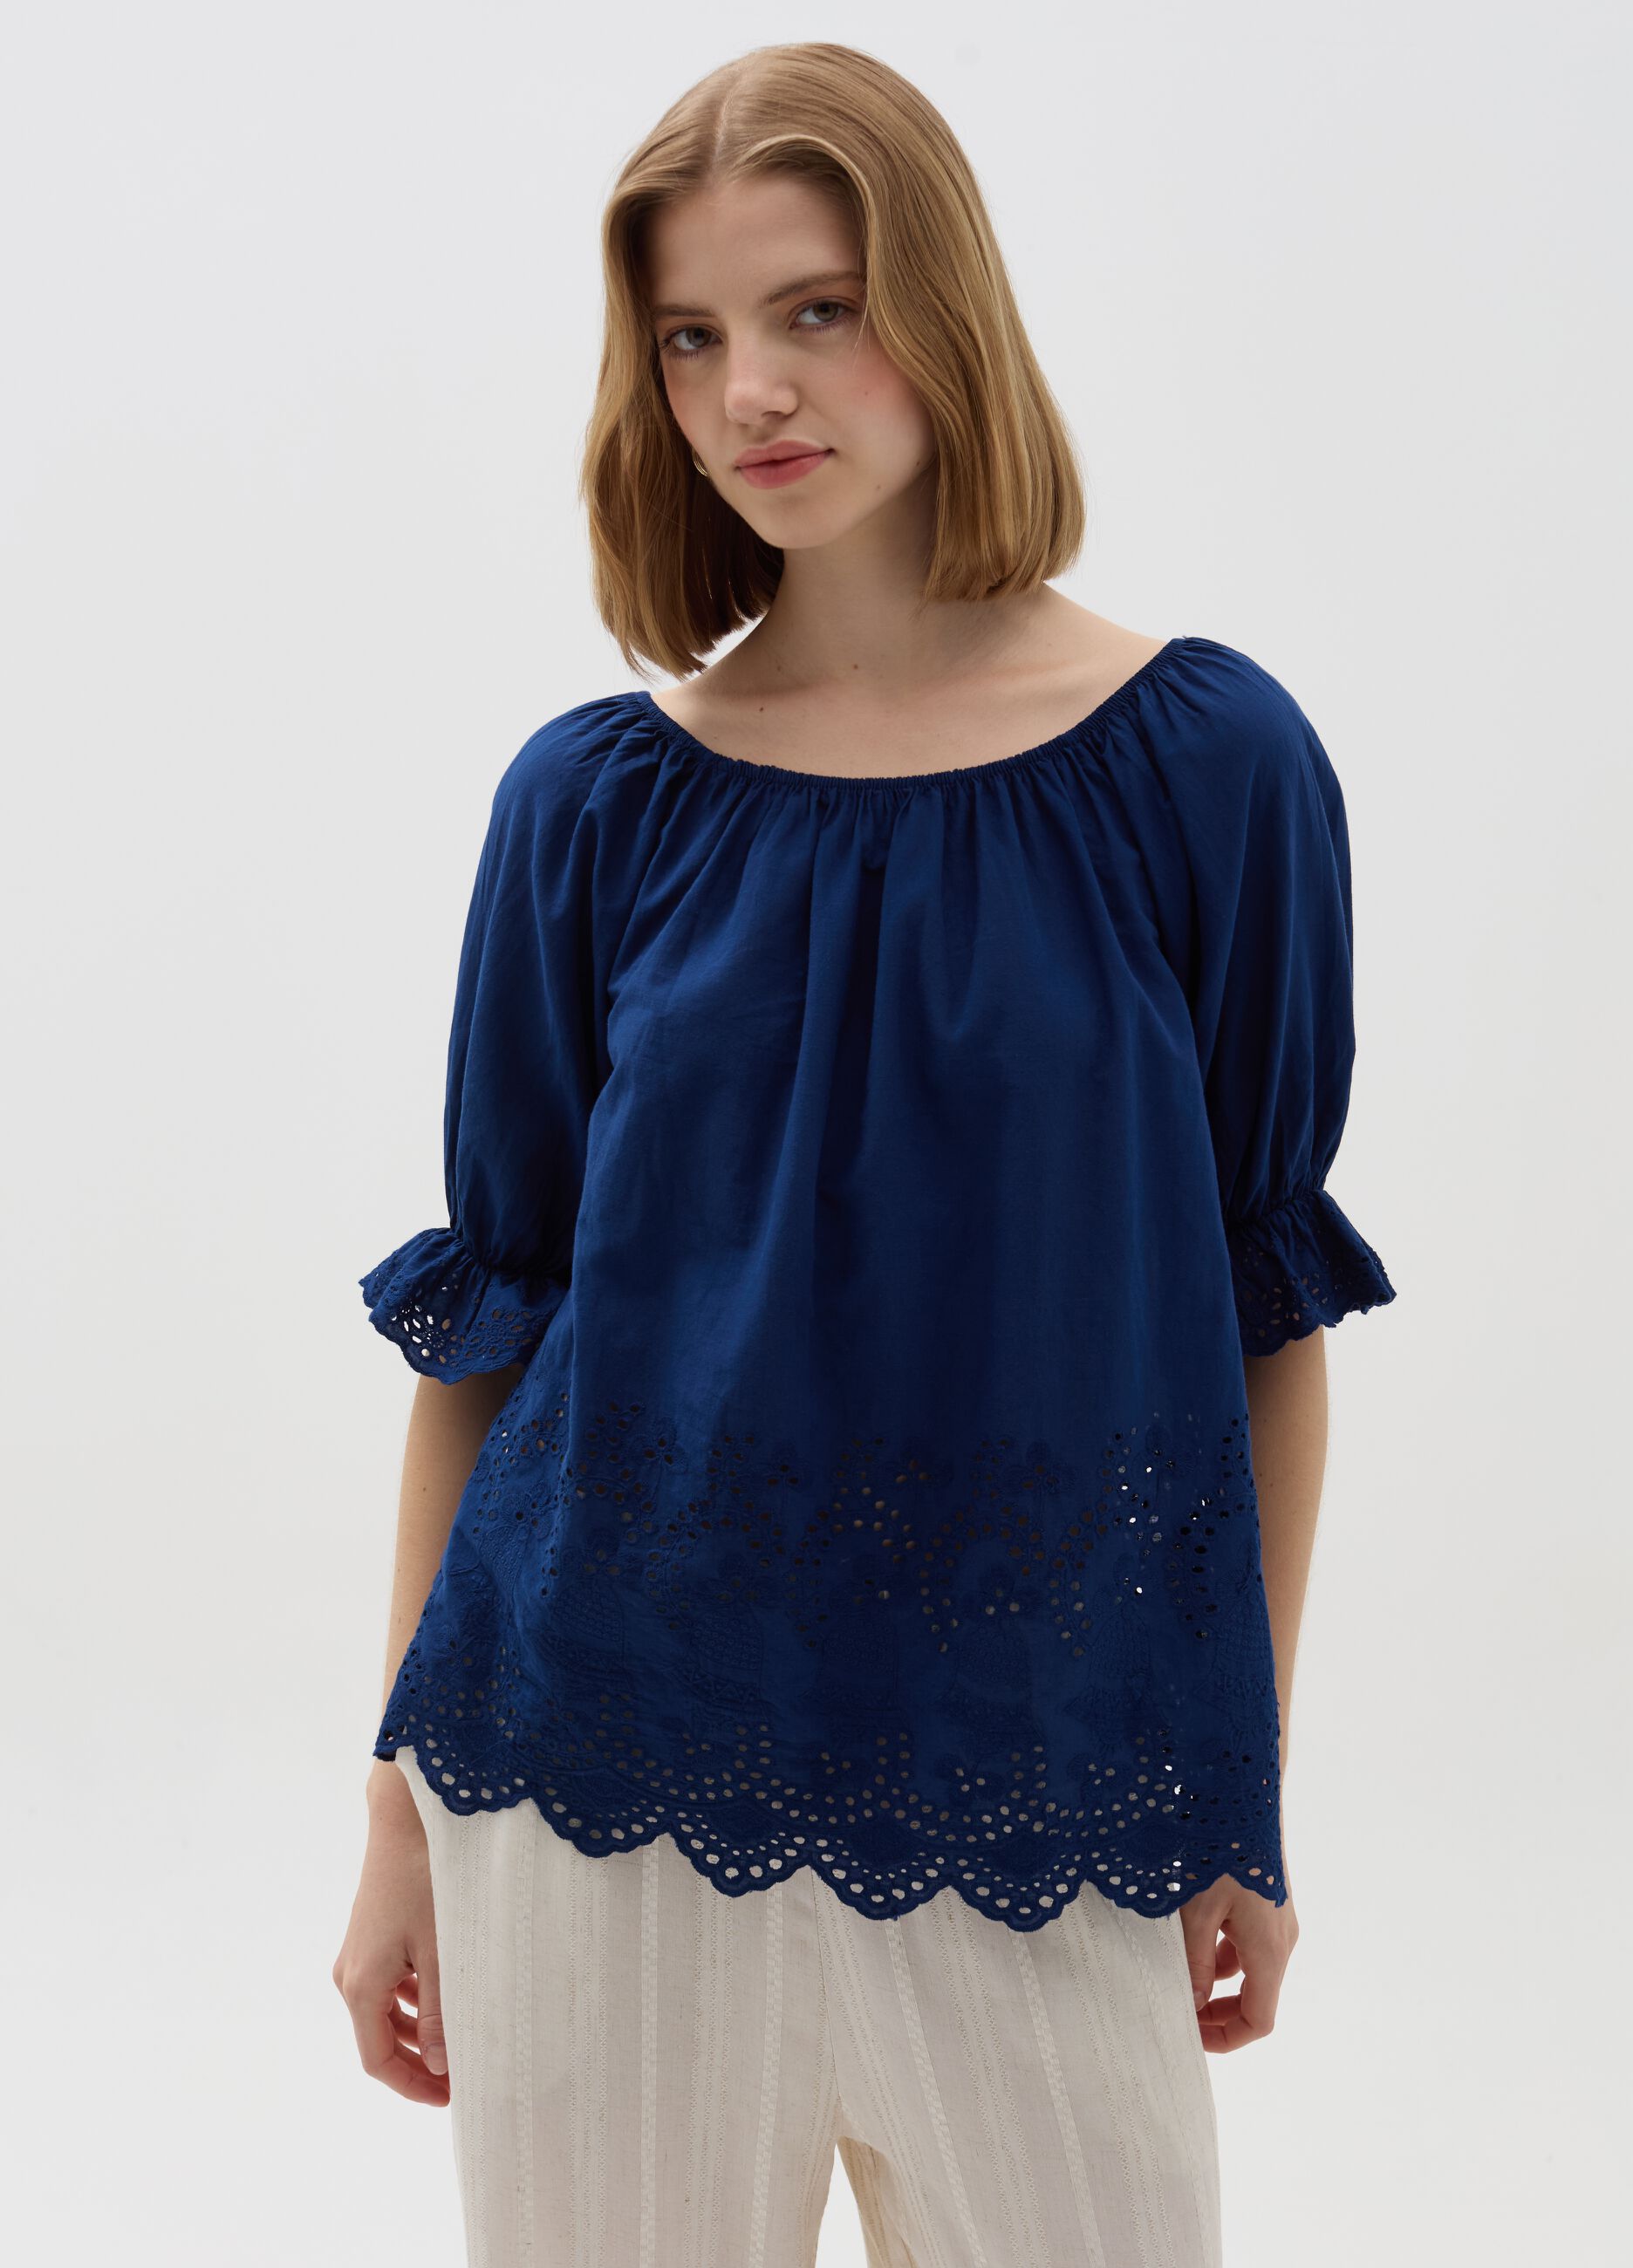 Blouse with embroidery and openwork details